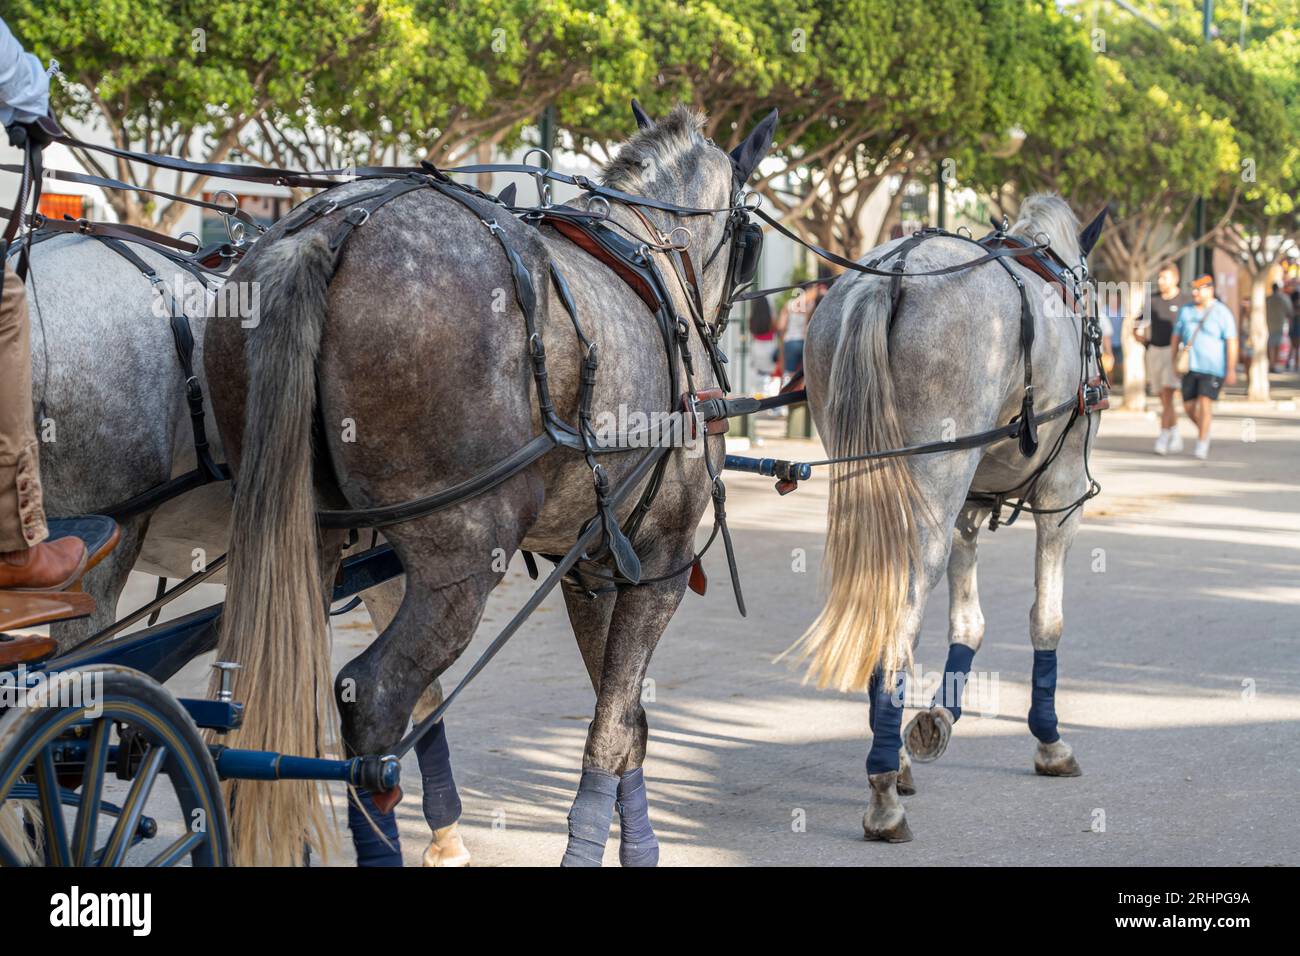 Celebrating Spanish culture, traditional horses dance in Malaga's iconic summer fair, showcasing equestrian excellence in the heart of Andalusia. Stock Photo